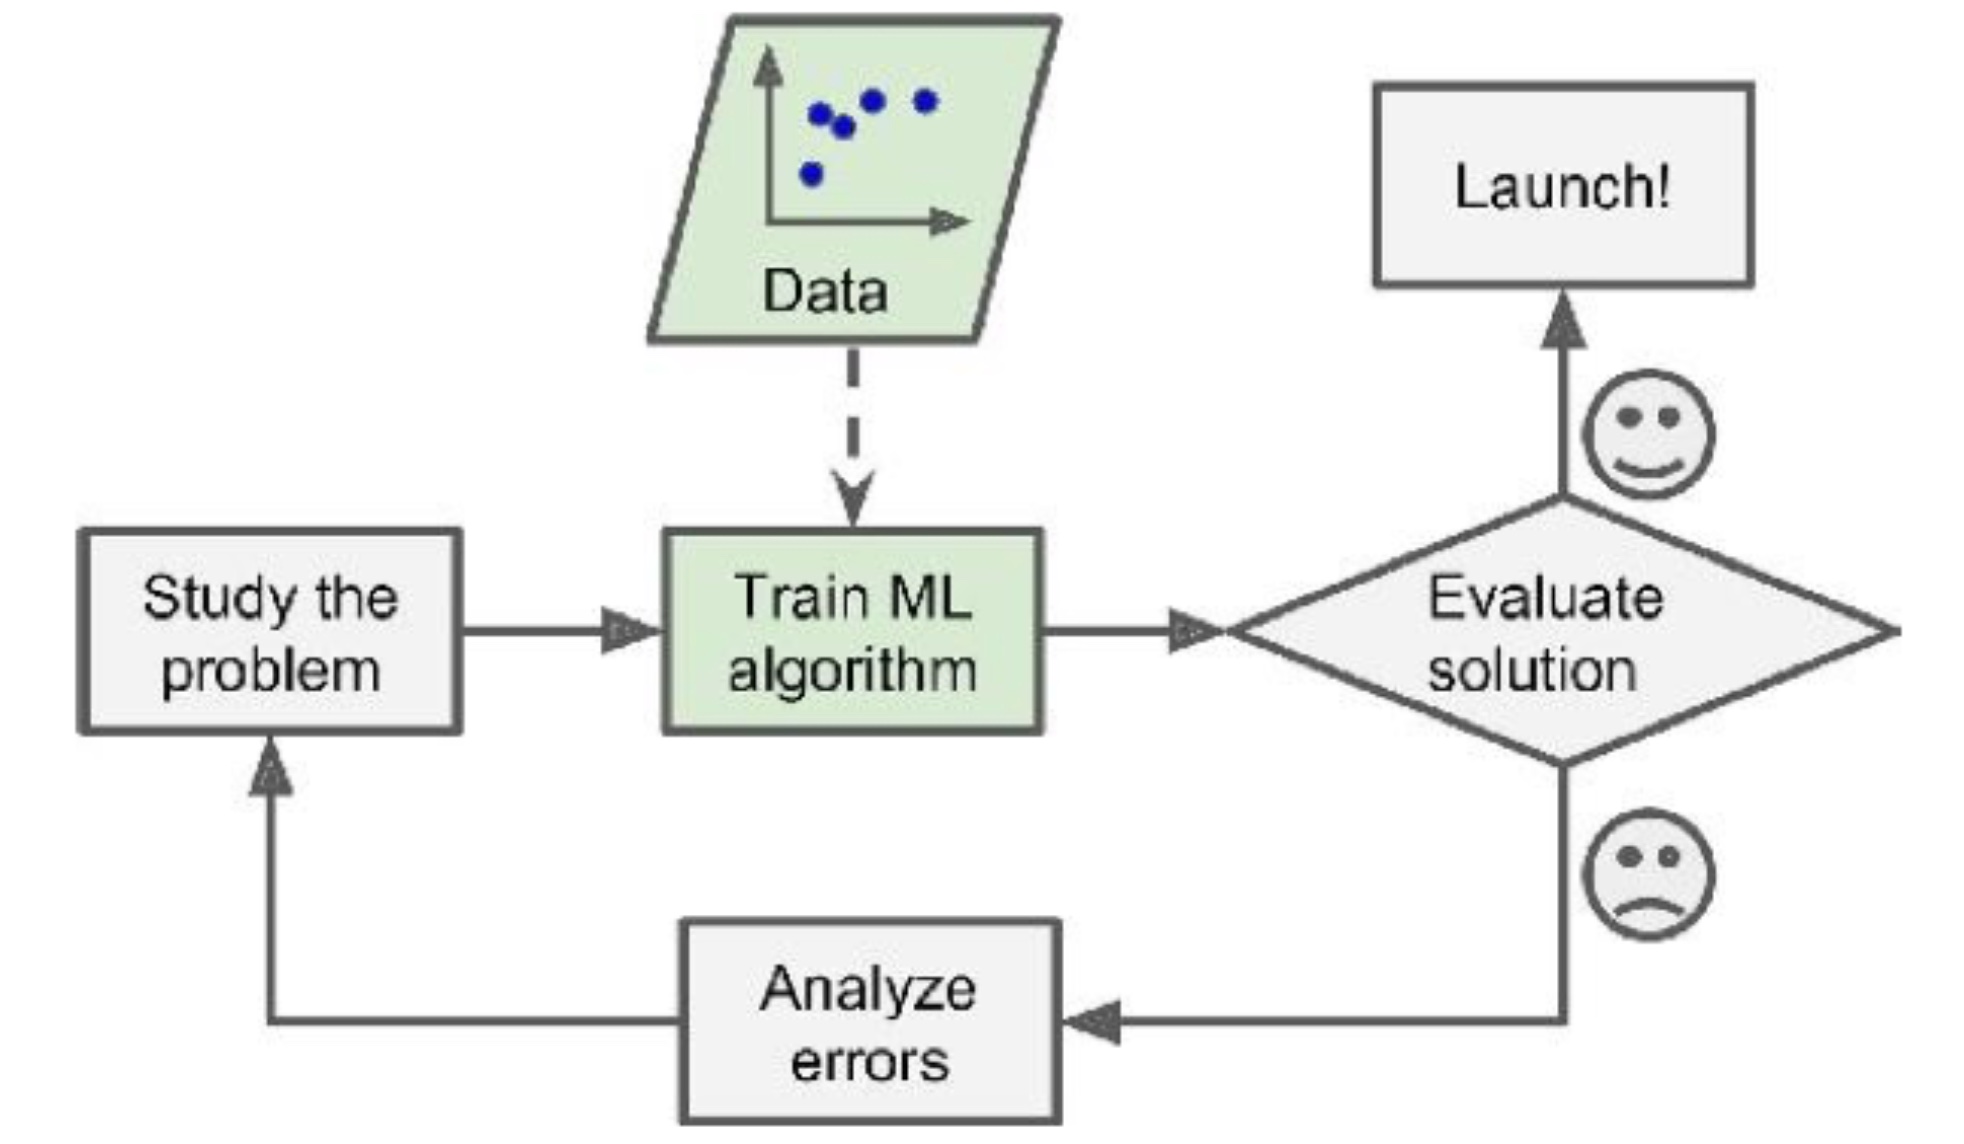 Machine learning workflow